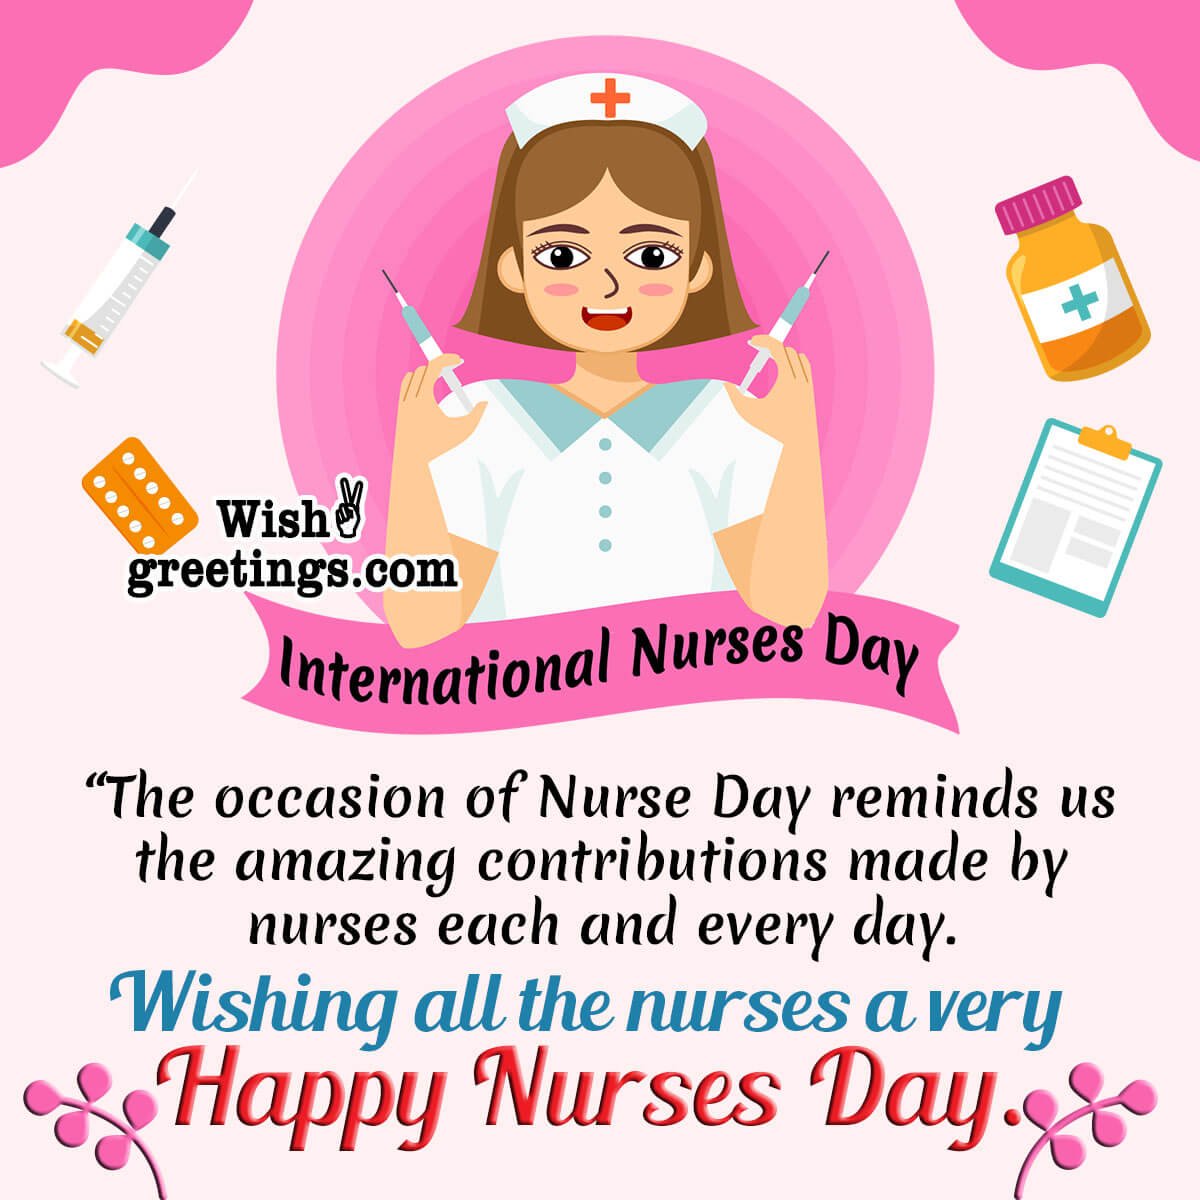 International Nurses Day Wishes Messages - Wish Greetings